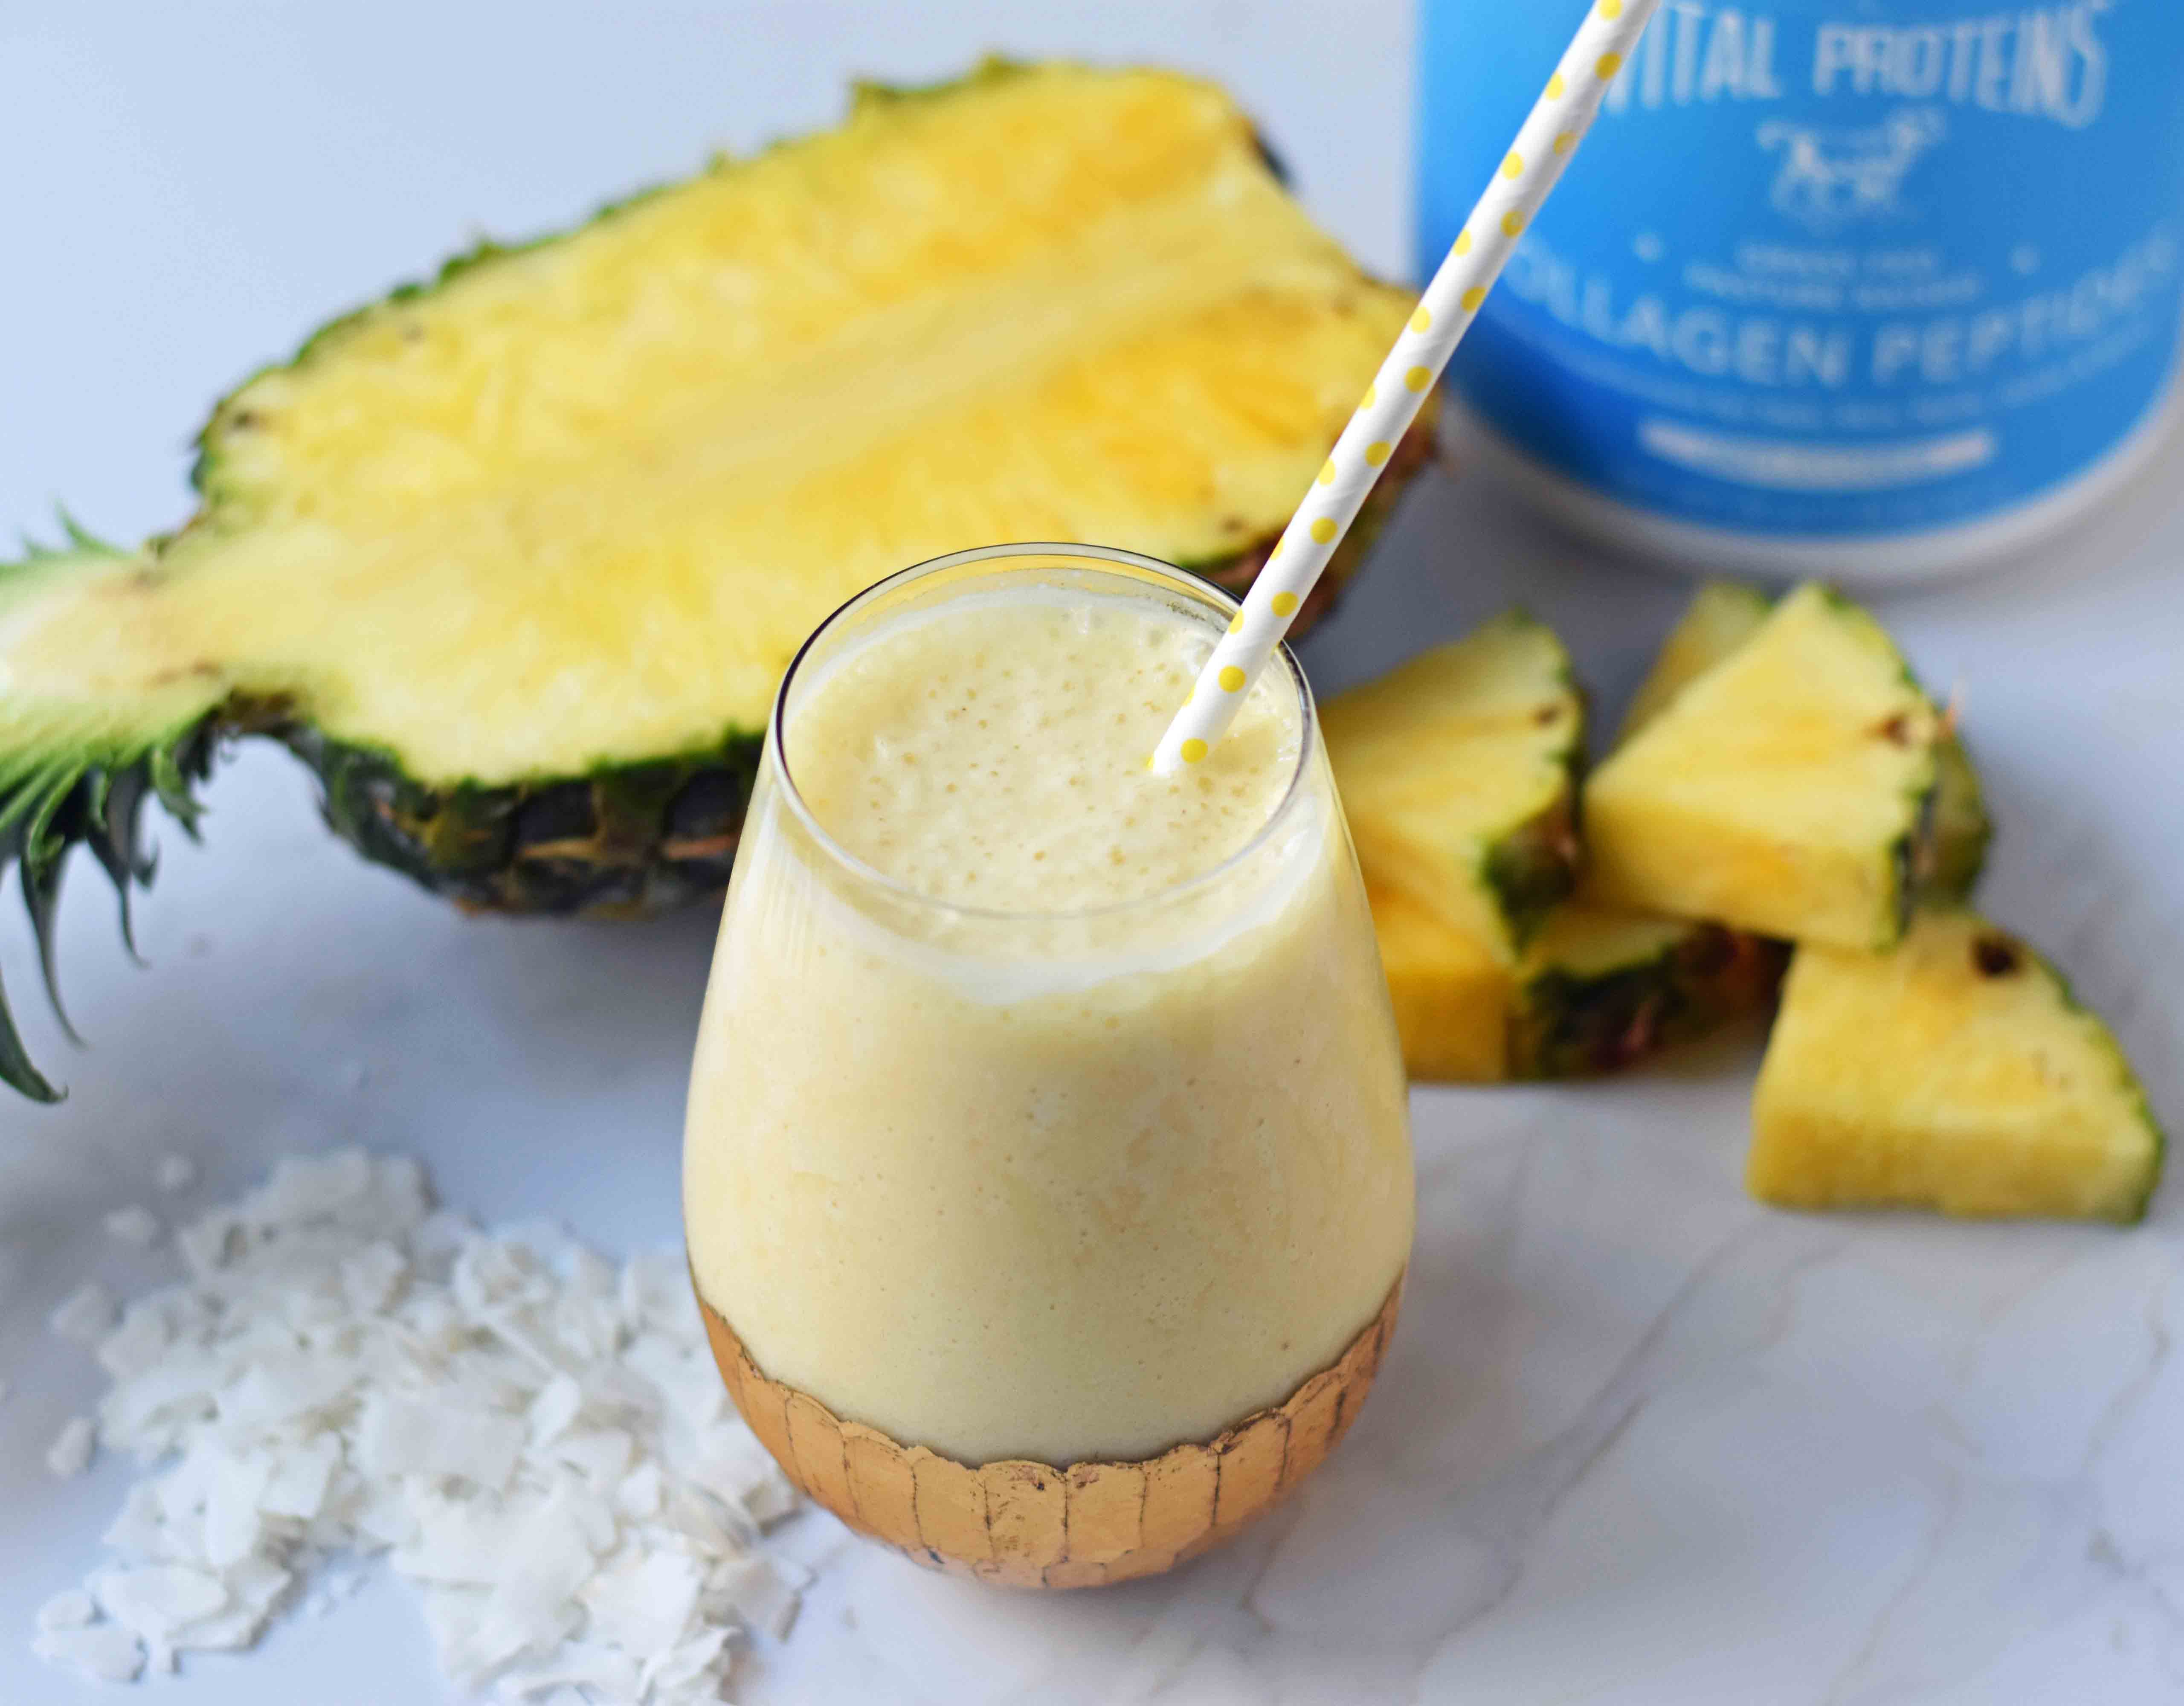 Healthy Pina Colada Smoothie. Fresh pineapple, coconut milk, banana, a touch of honey, and optional coconut yogurt. A creamy sweet healthy coconut pineapple smoothie. www.modernhoney.com